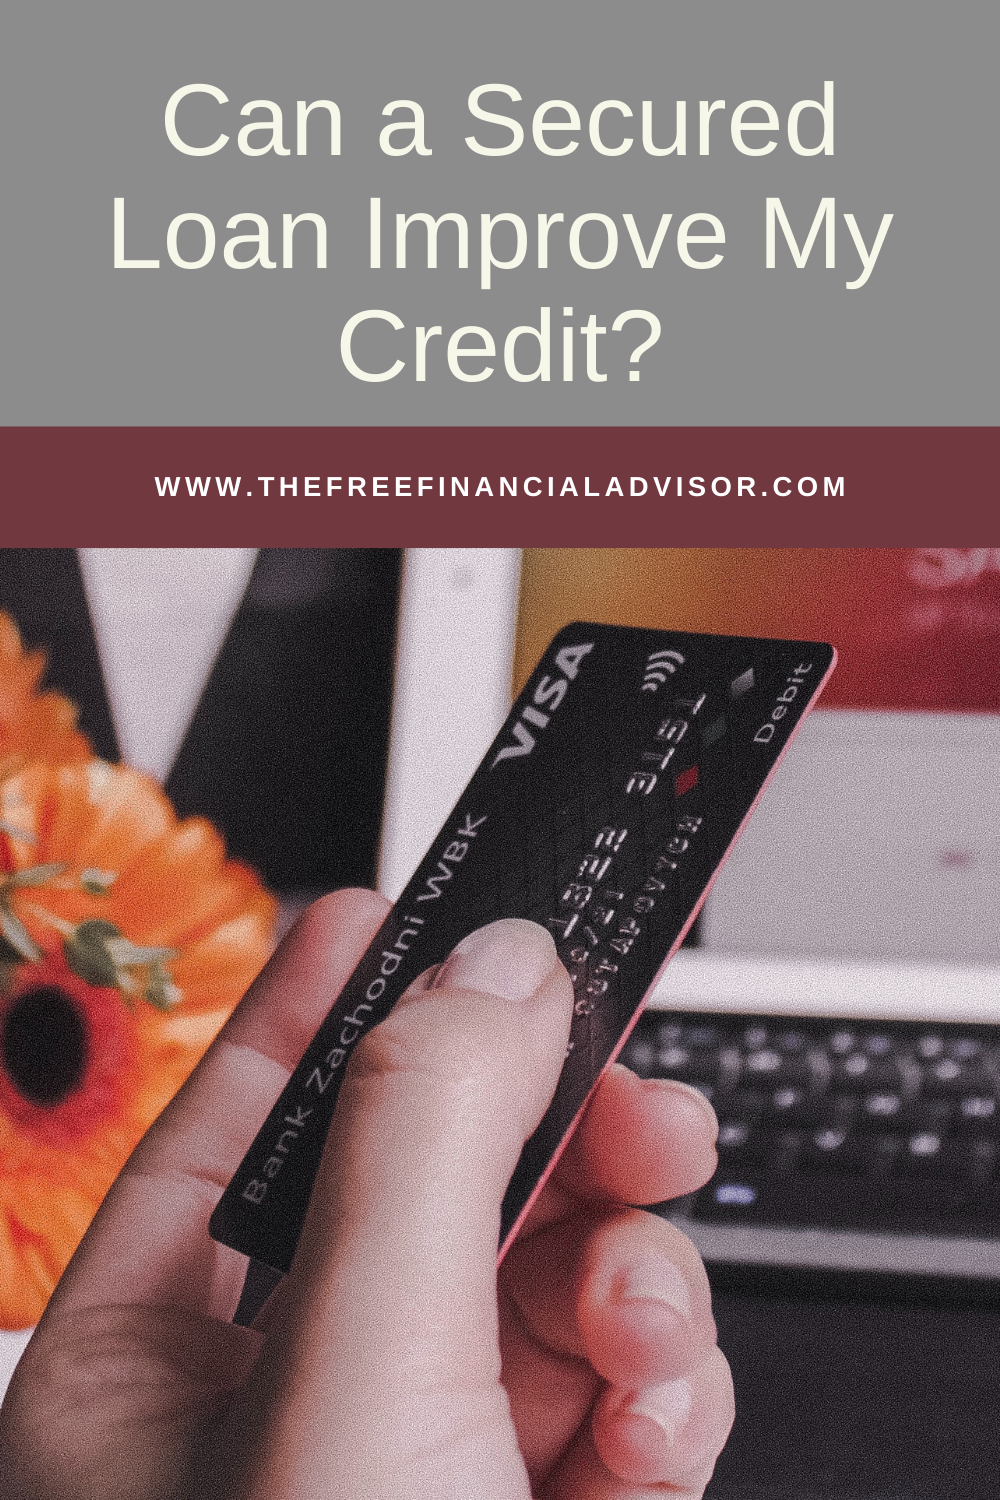 Can a Secured Loan Improve My Credit?